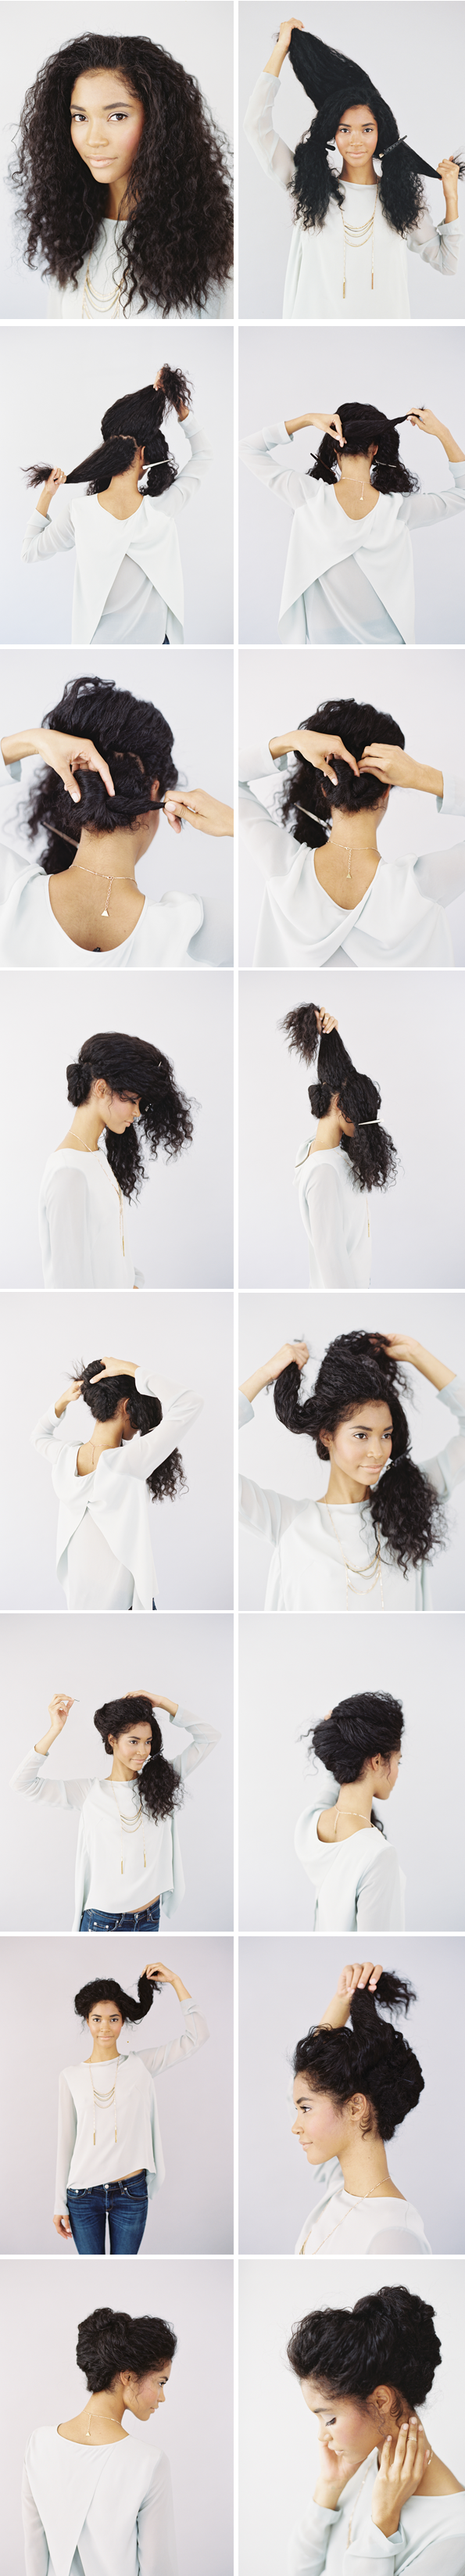 Simple updo for long curly hair